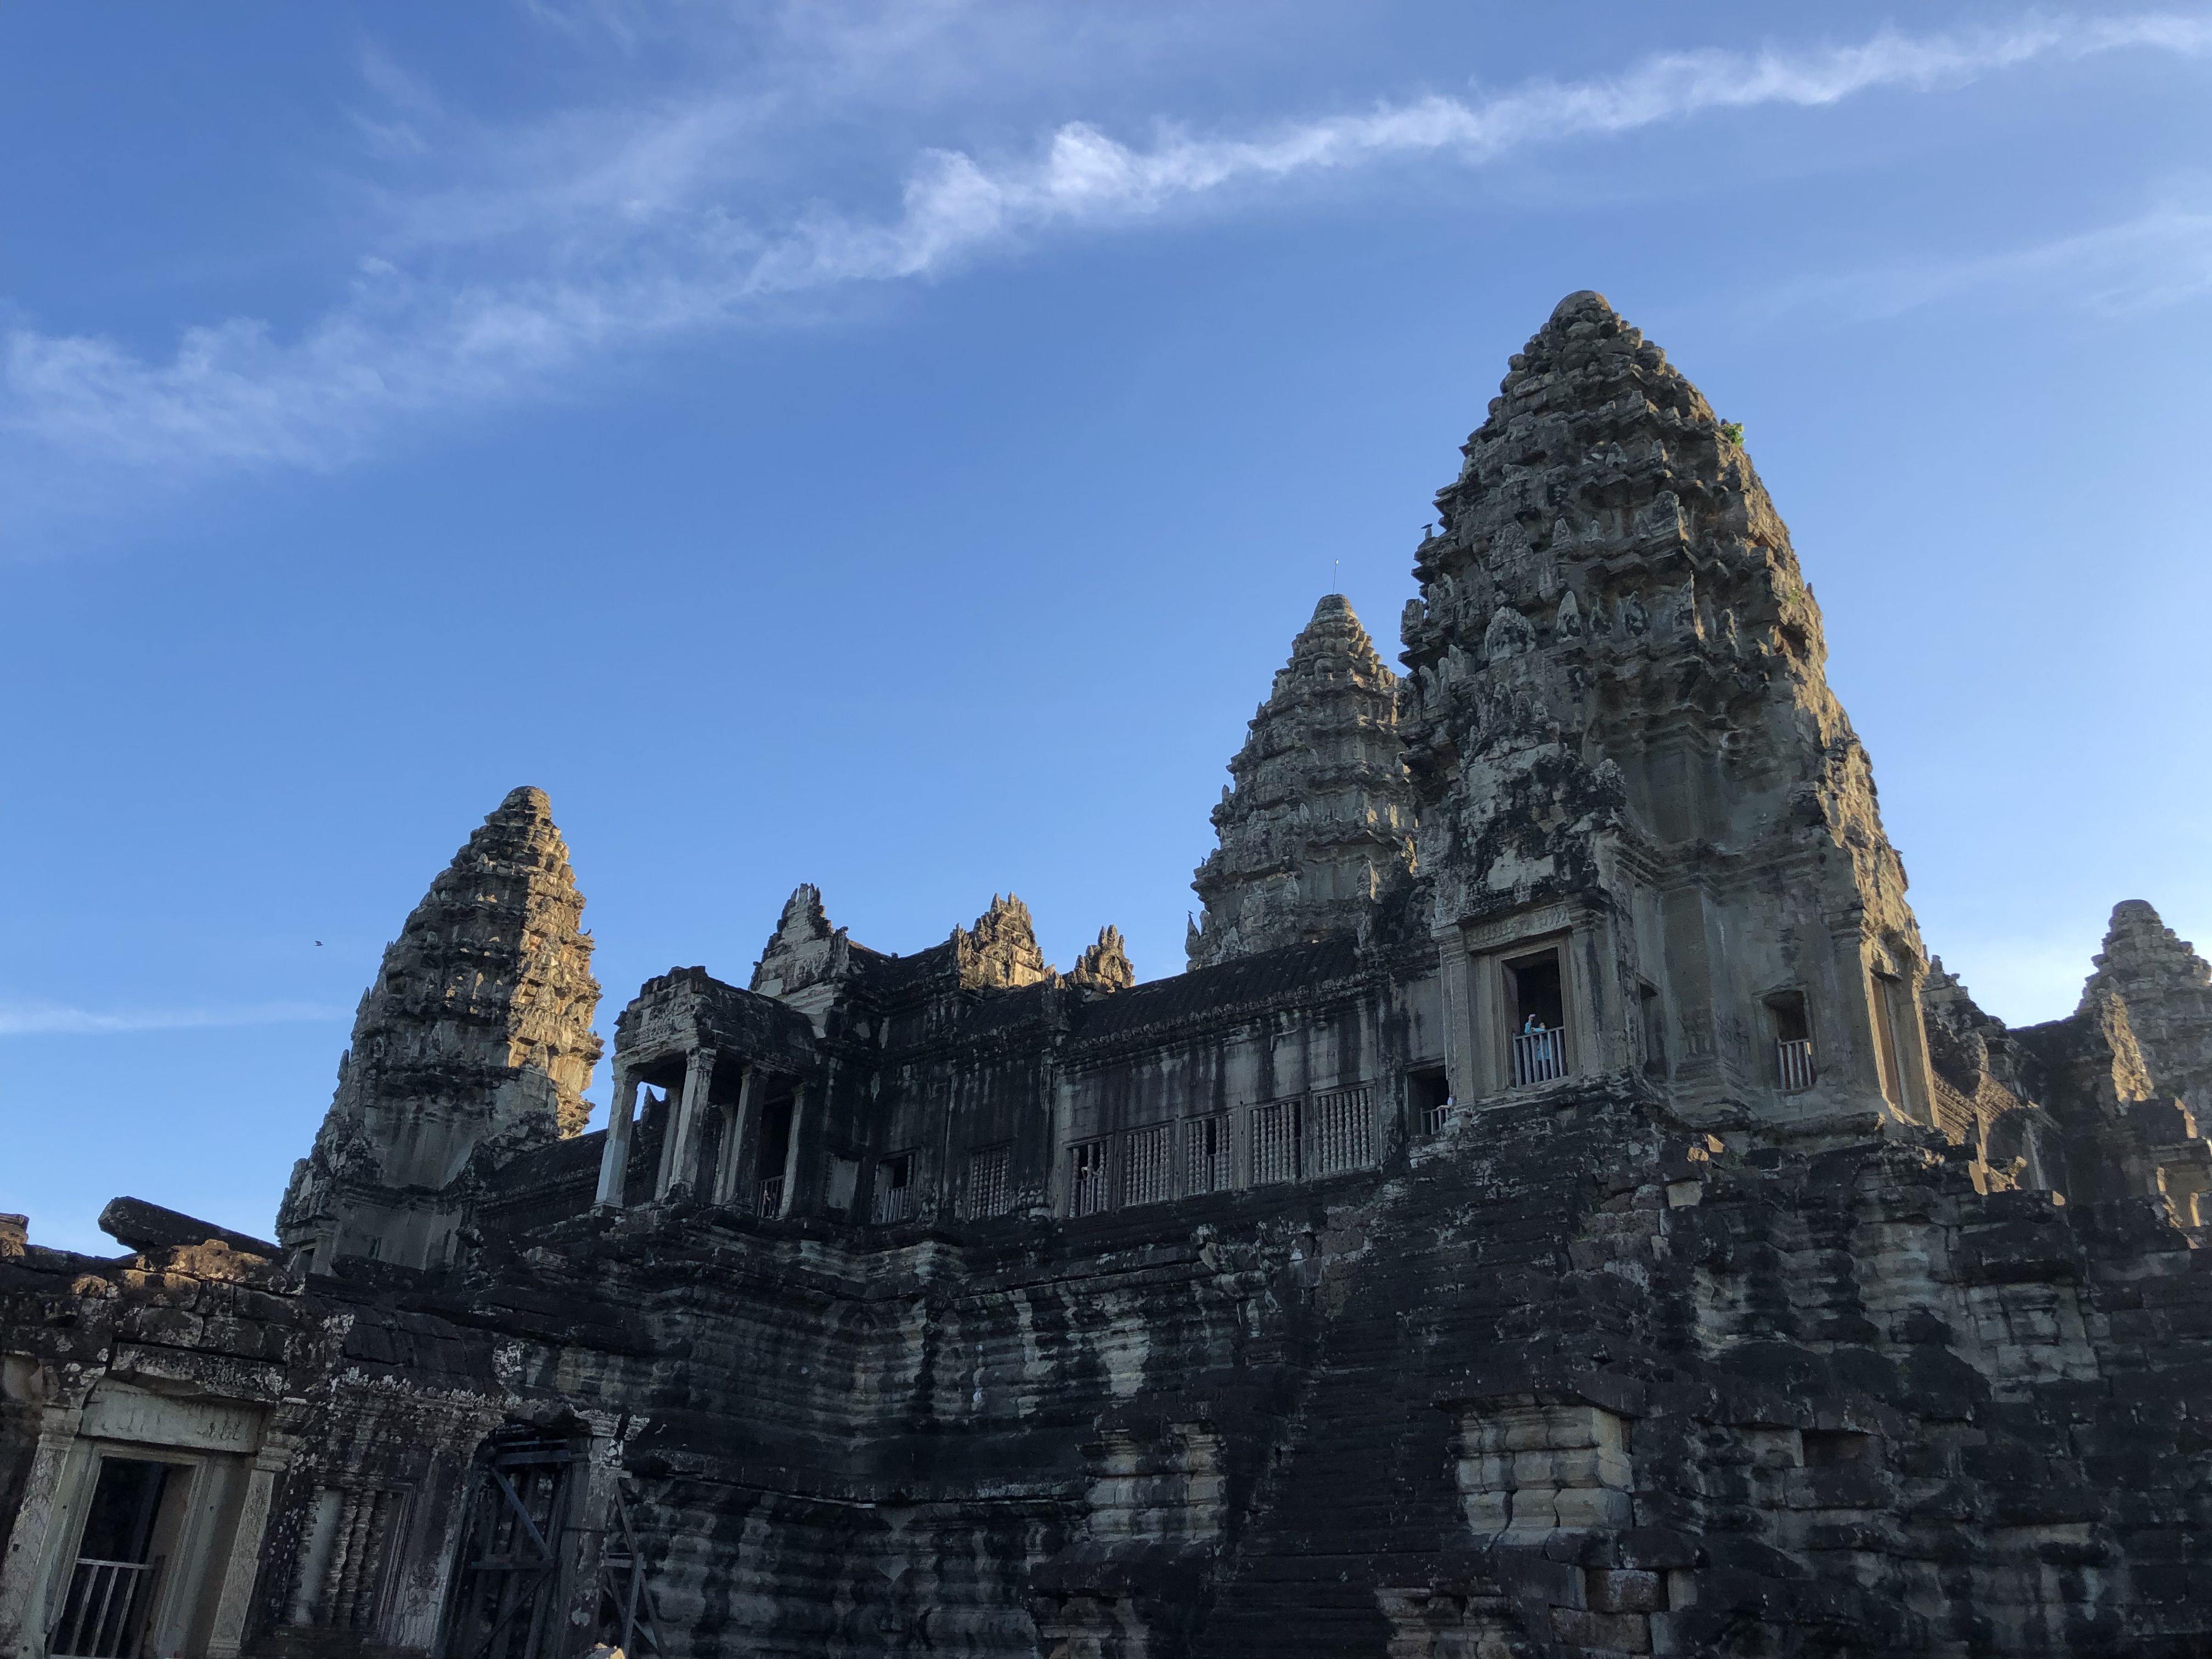 A shot of Angkor Wat. There are several towers covered in ornate carvings, and below them are doorways and pillars and colonnades carved into the stone.